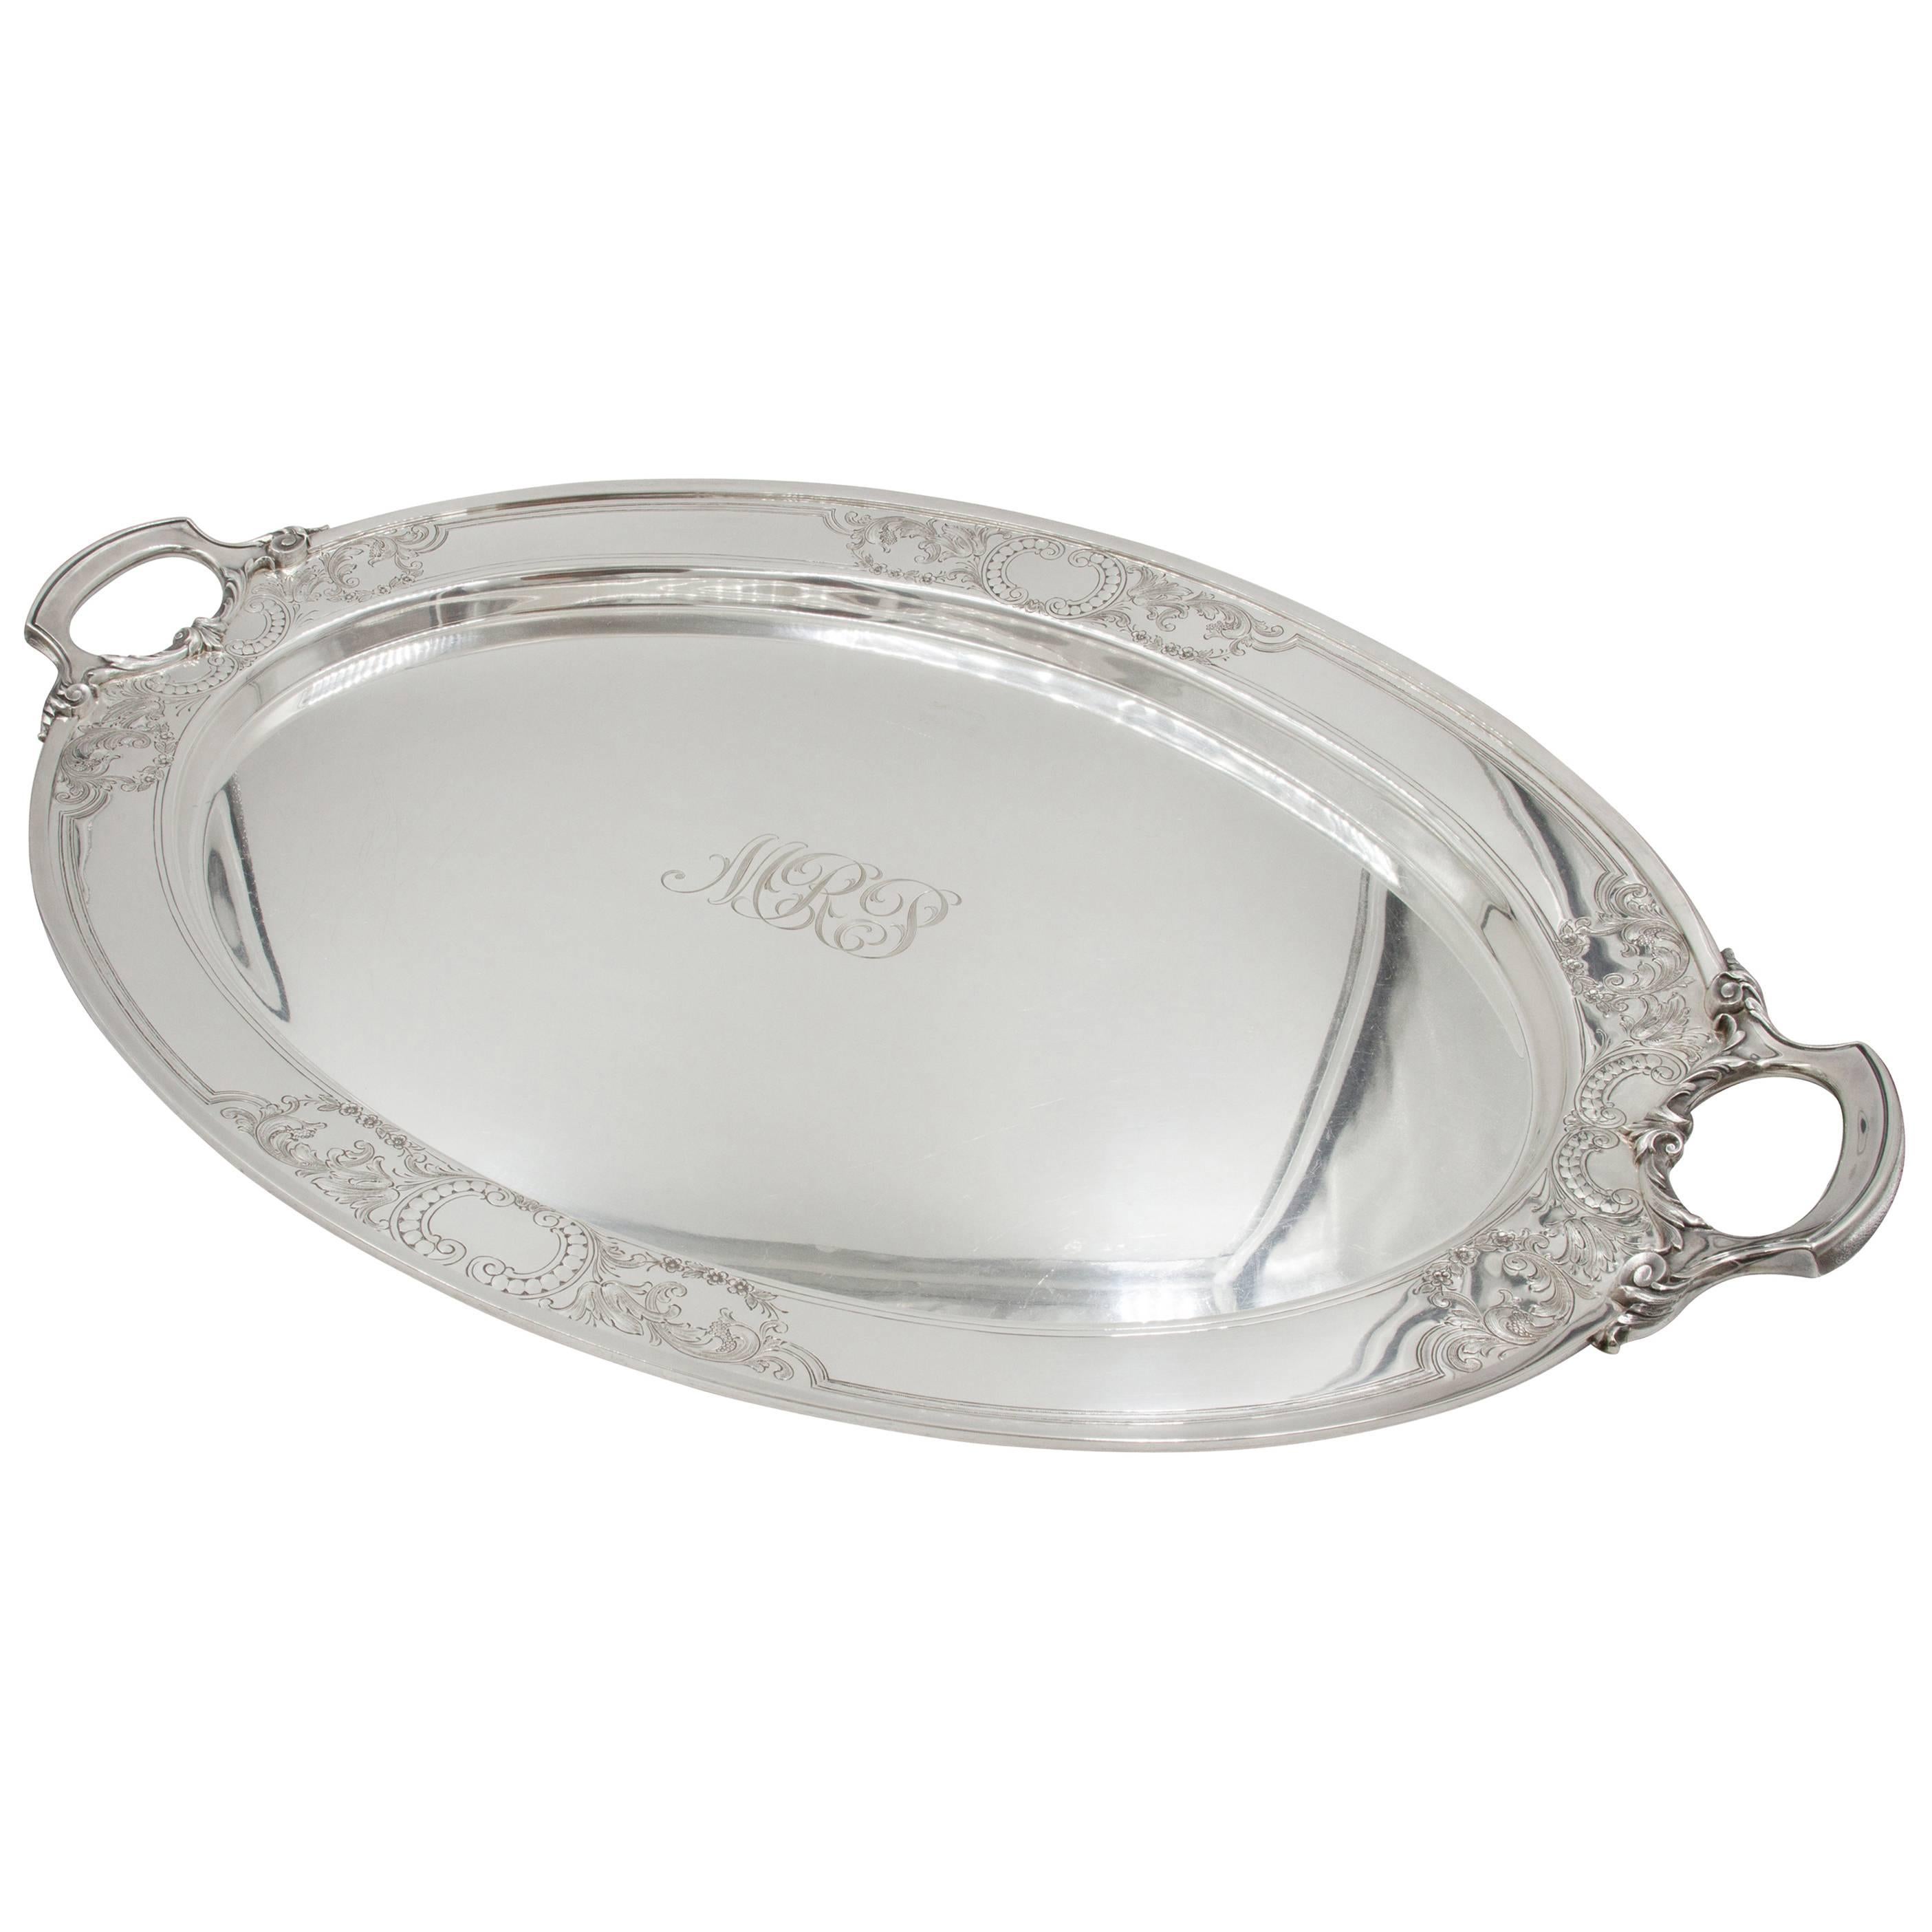 This oval serving tray would be ideal under a large tea set or for those grand dinner parties or a large get-together. Crisp etchings of garlands and flowers are found around the handle and again along the center border (2.5). In the center there's